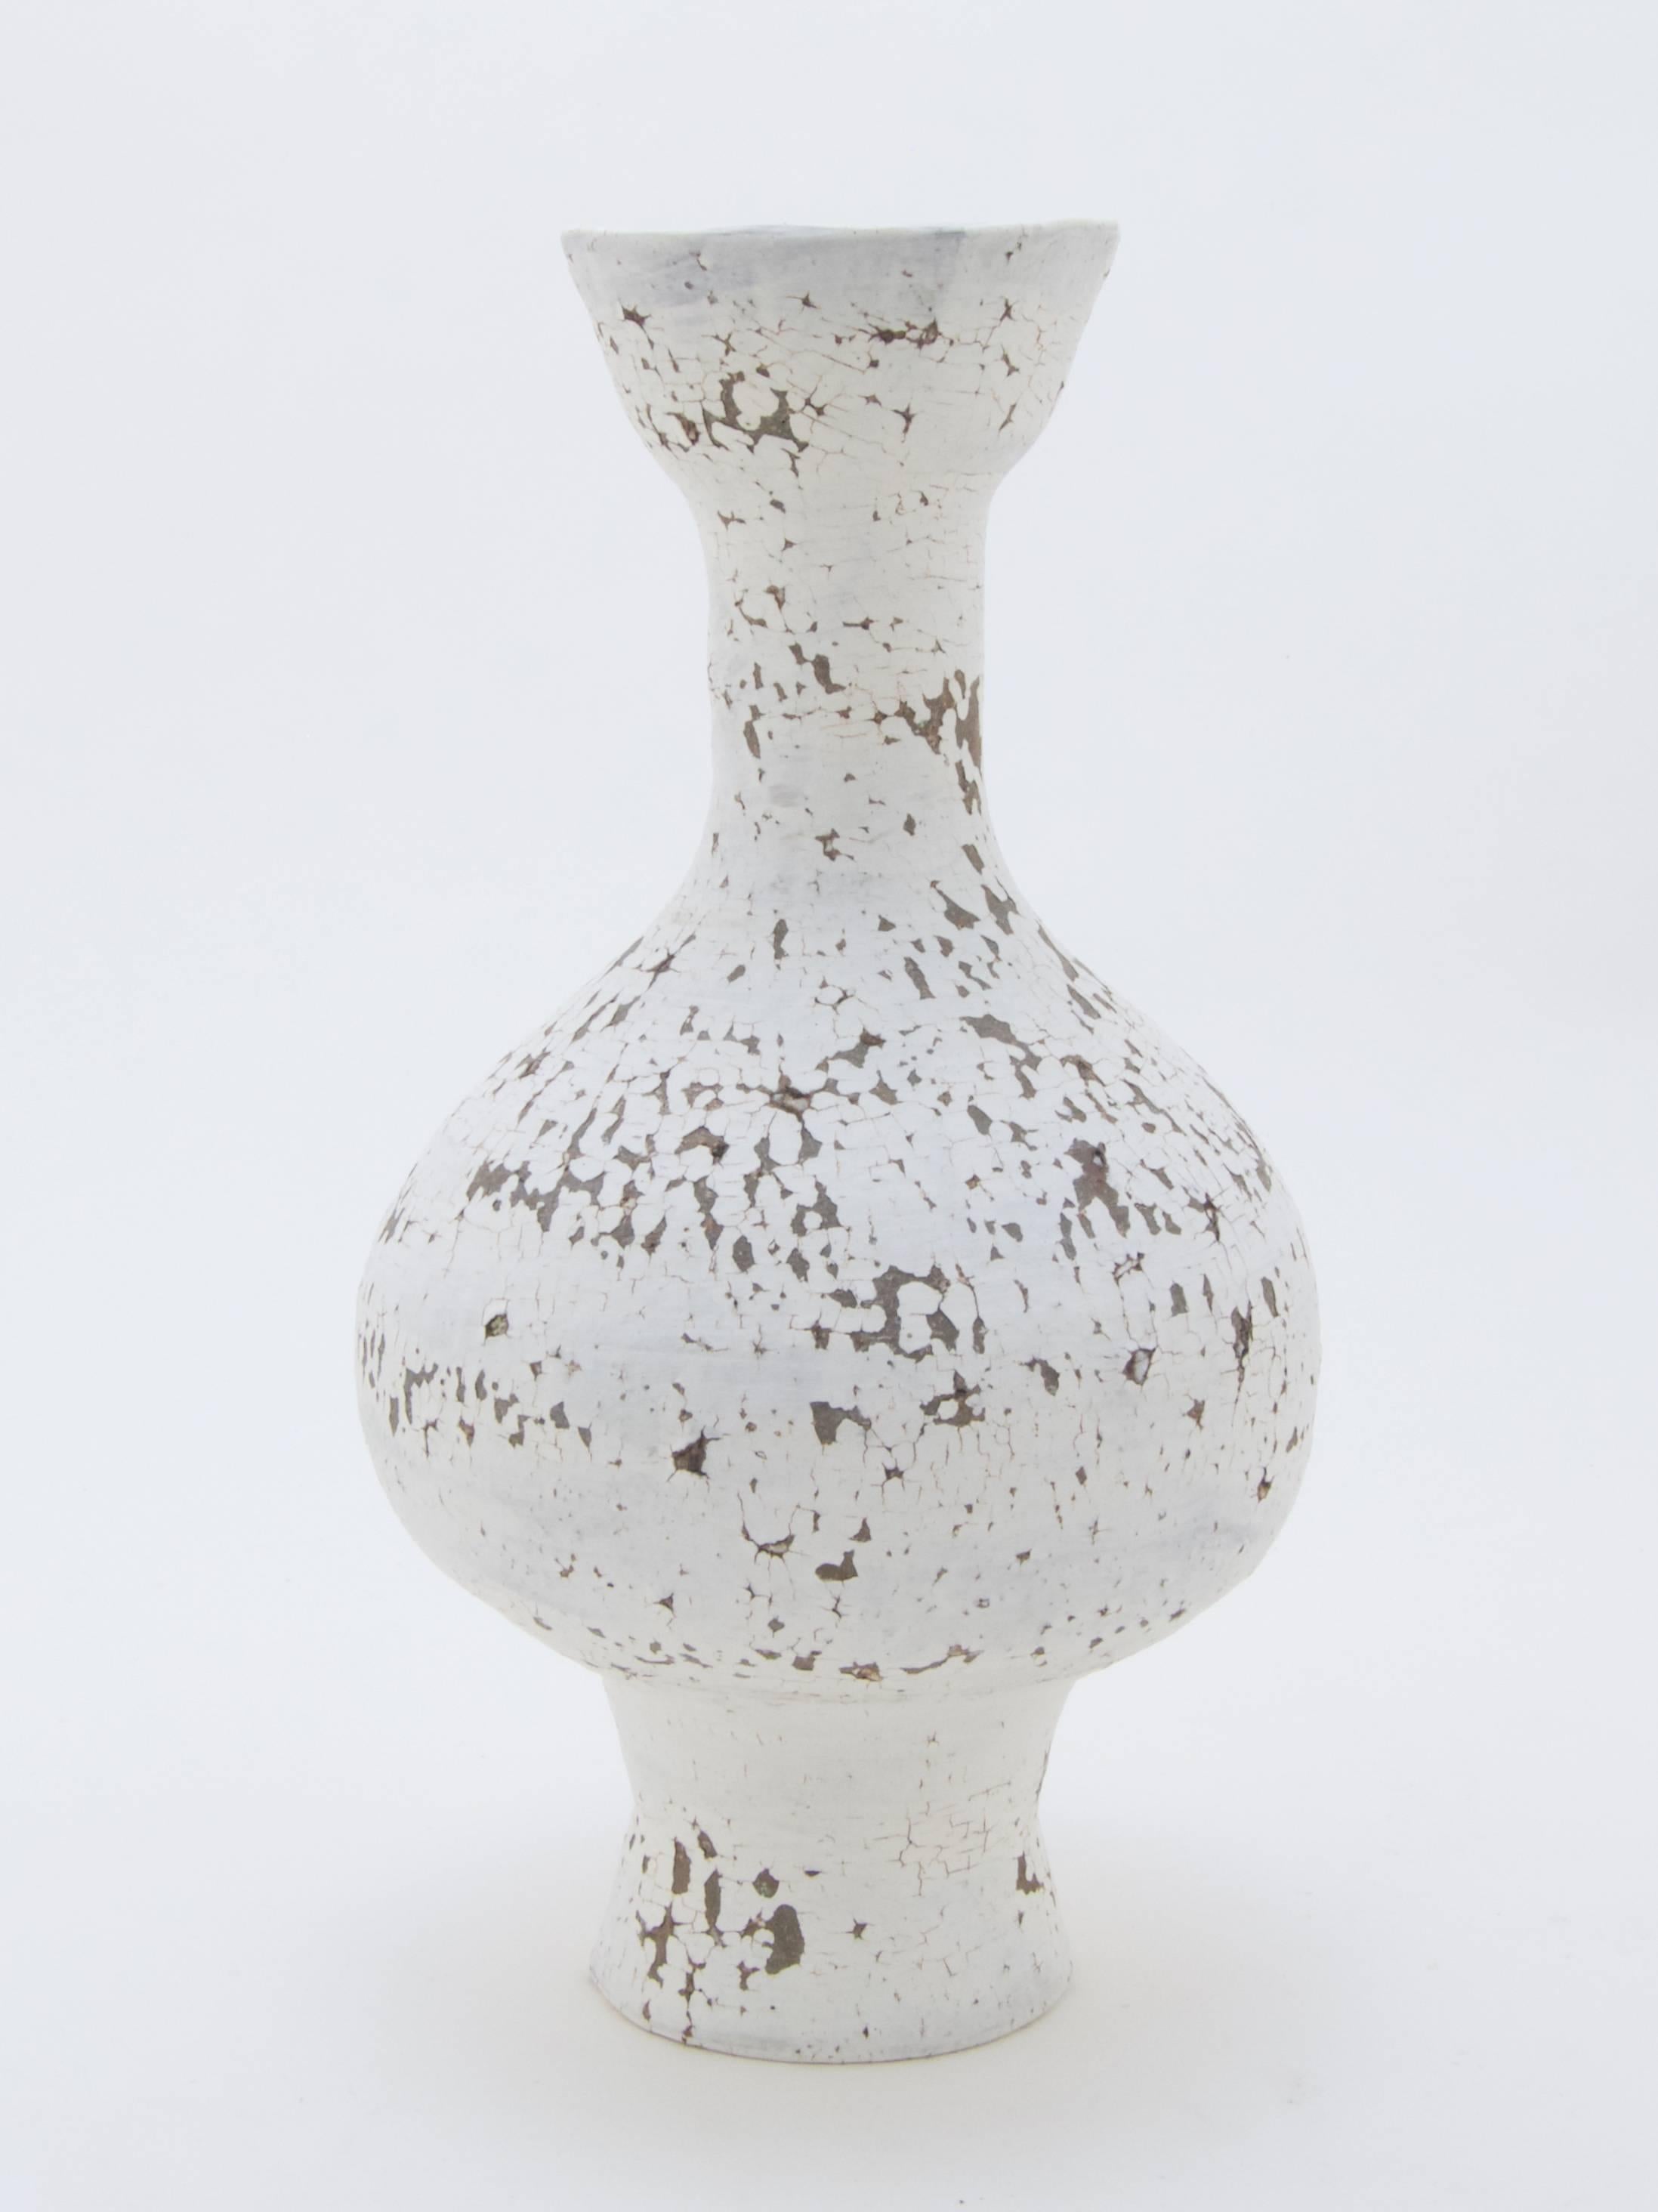 Flower vase by Austrian ceramic artist Matthias Kaiser.
The shape has been wheel thrown from a Czech stoneware clay and treated with white slip, similar to the Japanese/Korean Hakeme and Kohiki styles.
But the piece underwent two high-temperature